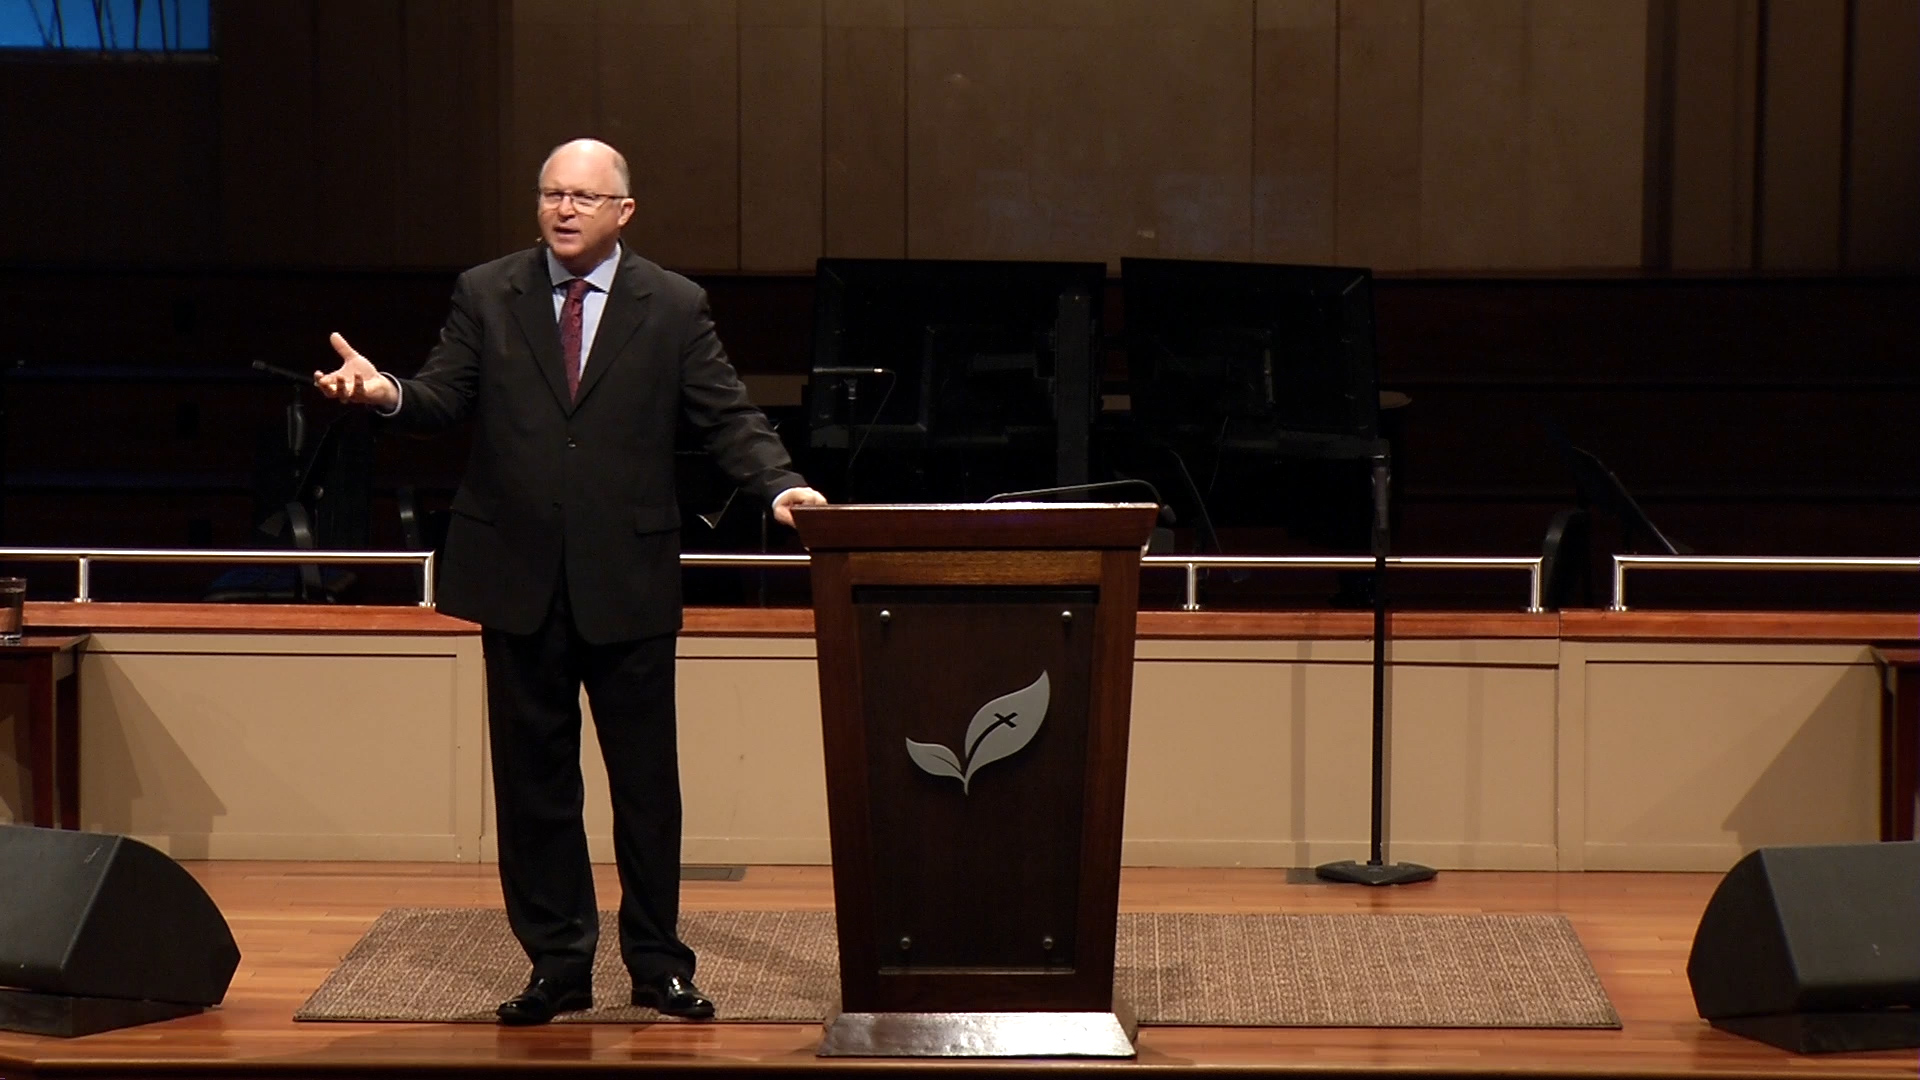 Pastor Paul Chappell: Jesus Is the Light of the World